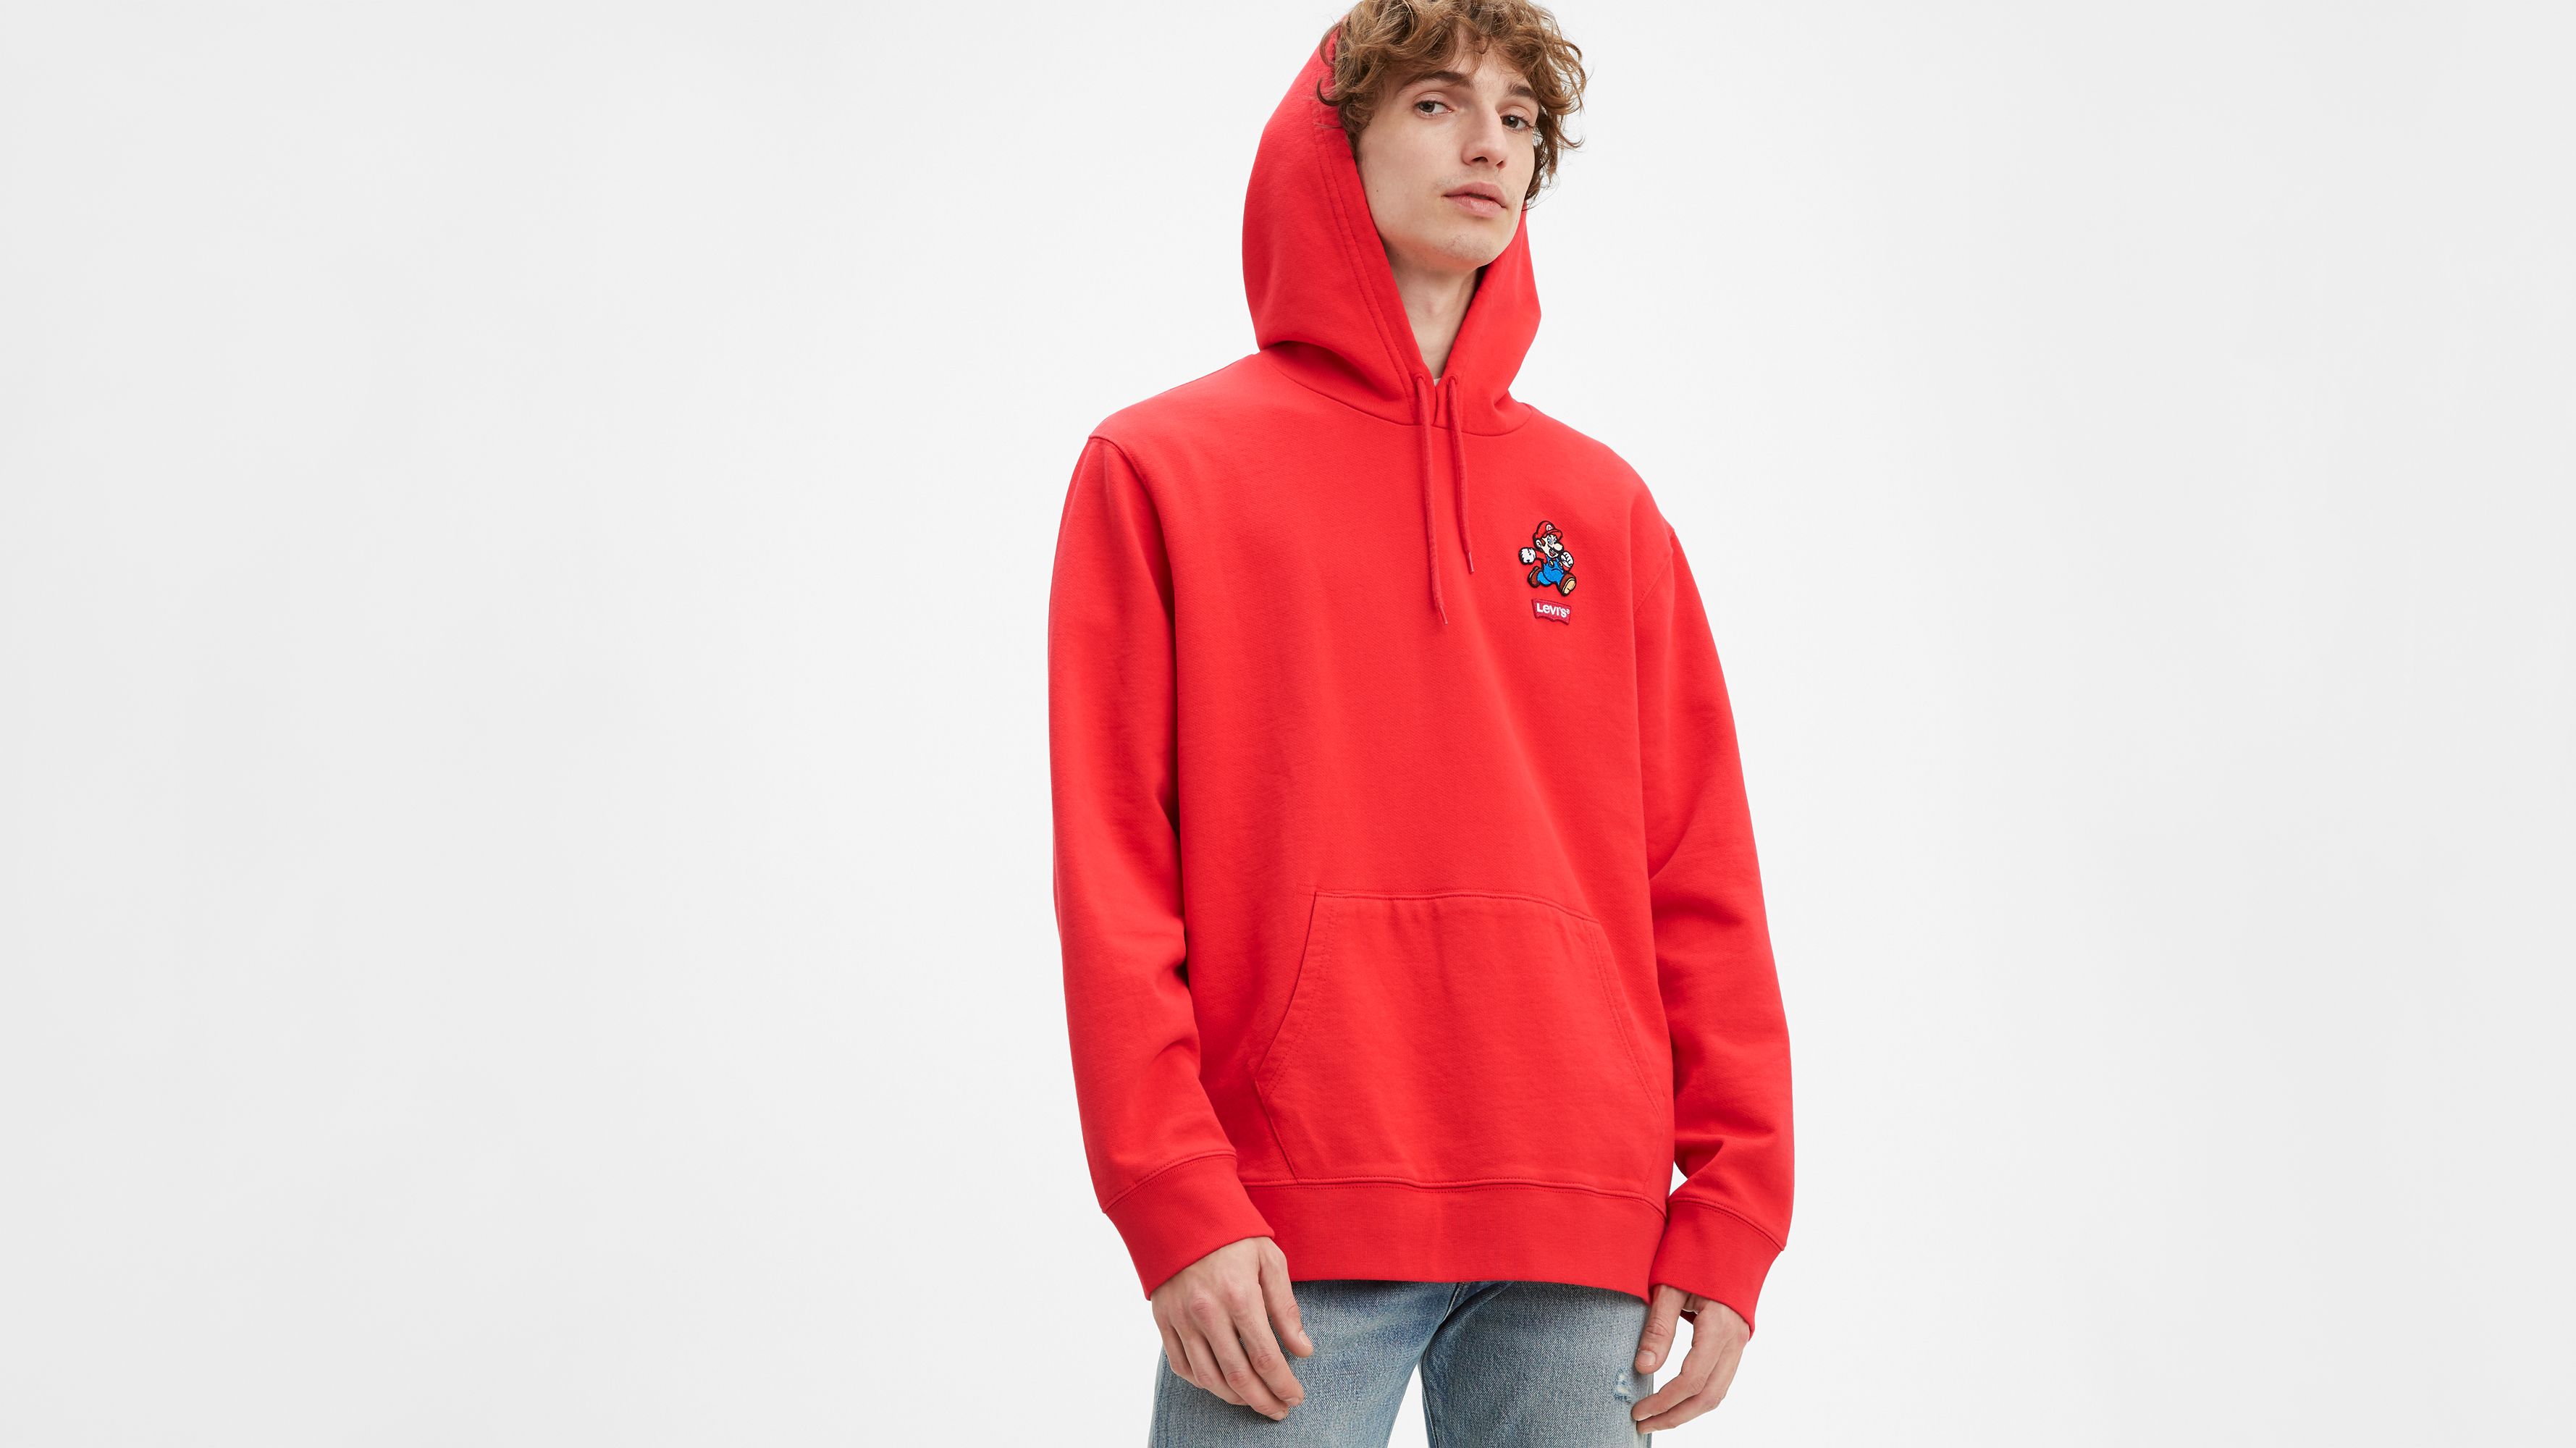 Pull, sweat Levi's® homme - Pull, sweat Levi's® pour homme